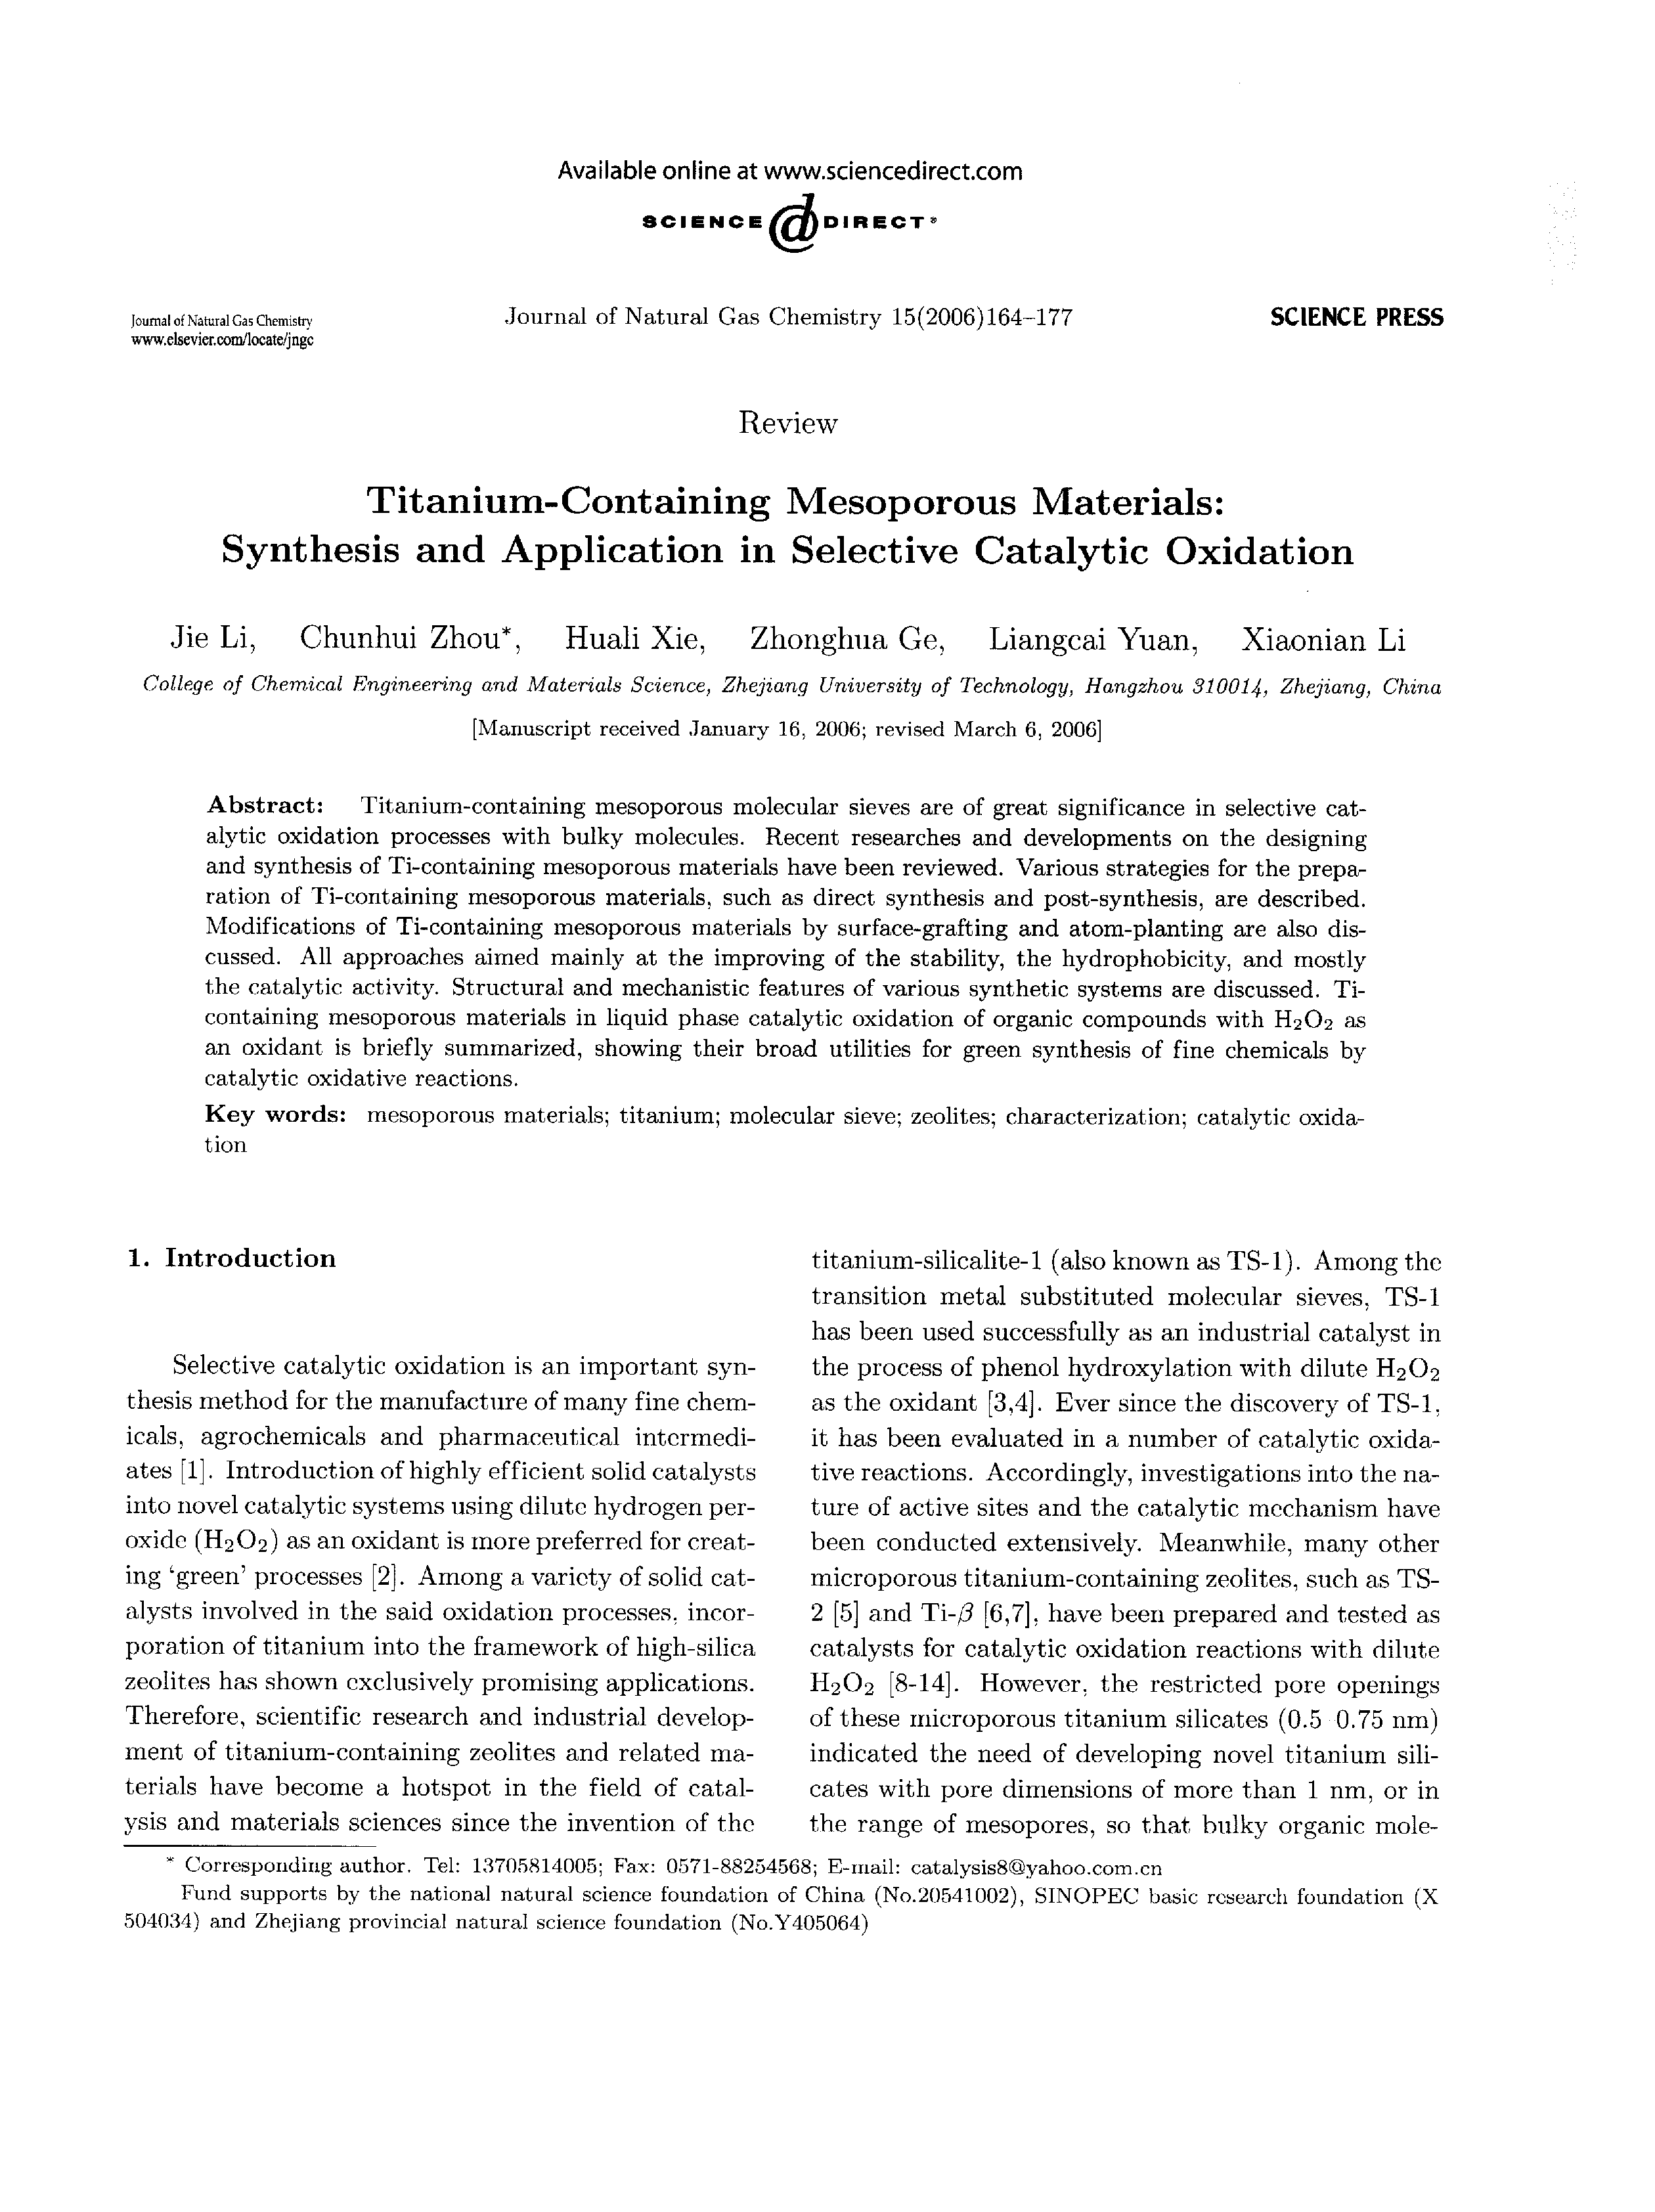 Titanium Containing Mesoporous Materials  Synthesis and Application in Selective Catalytic Oxidation